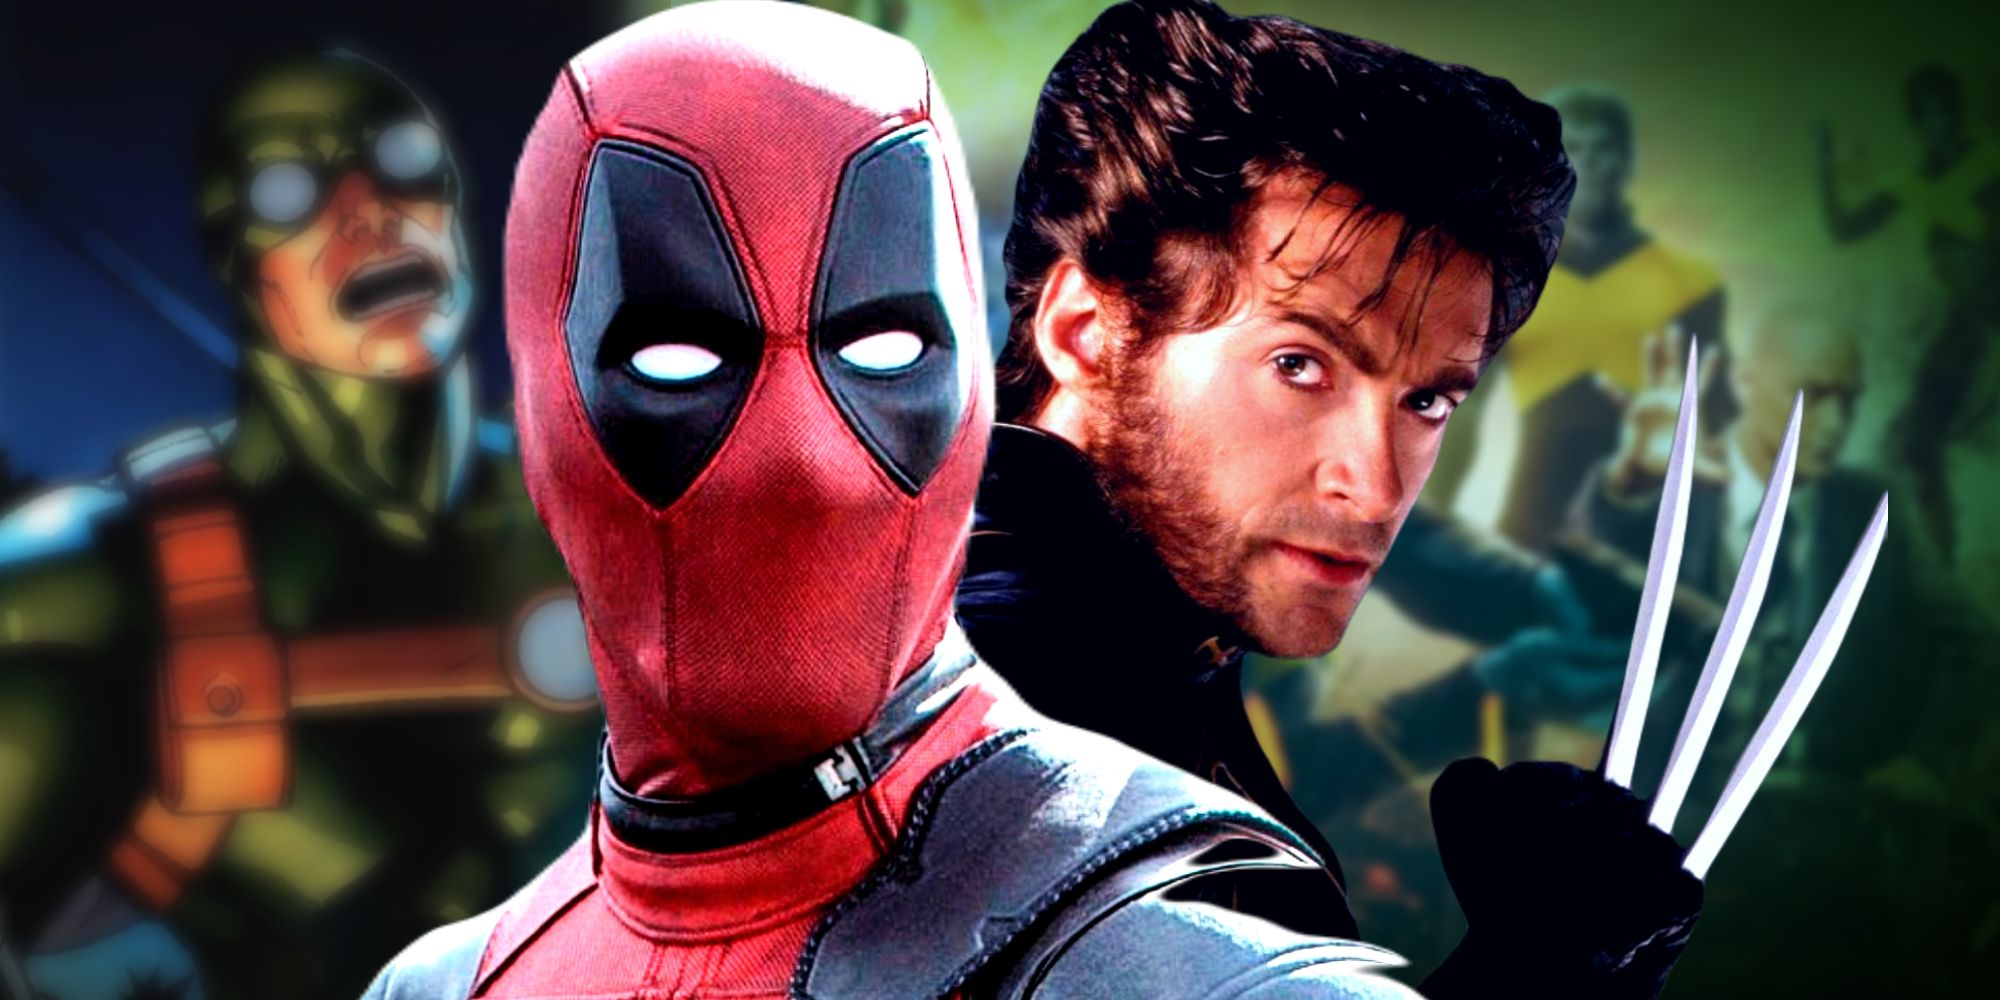 Deadpool & Wolverine Look at the Camera with the X-Men and Hydra Bob in the Background